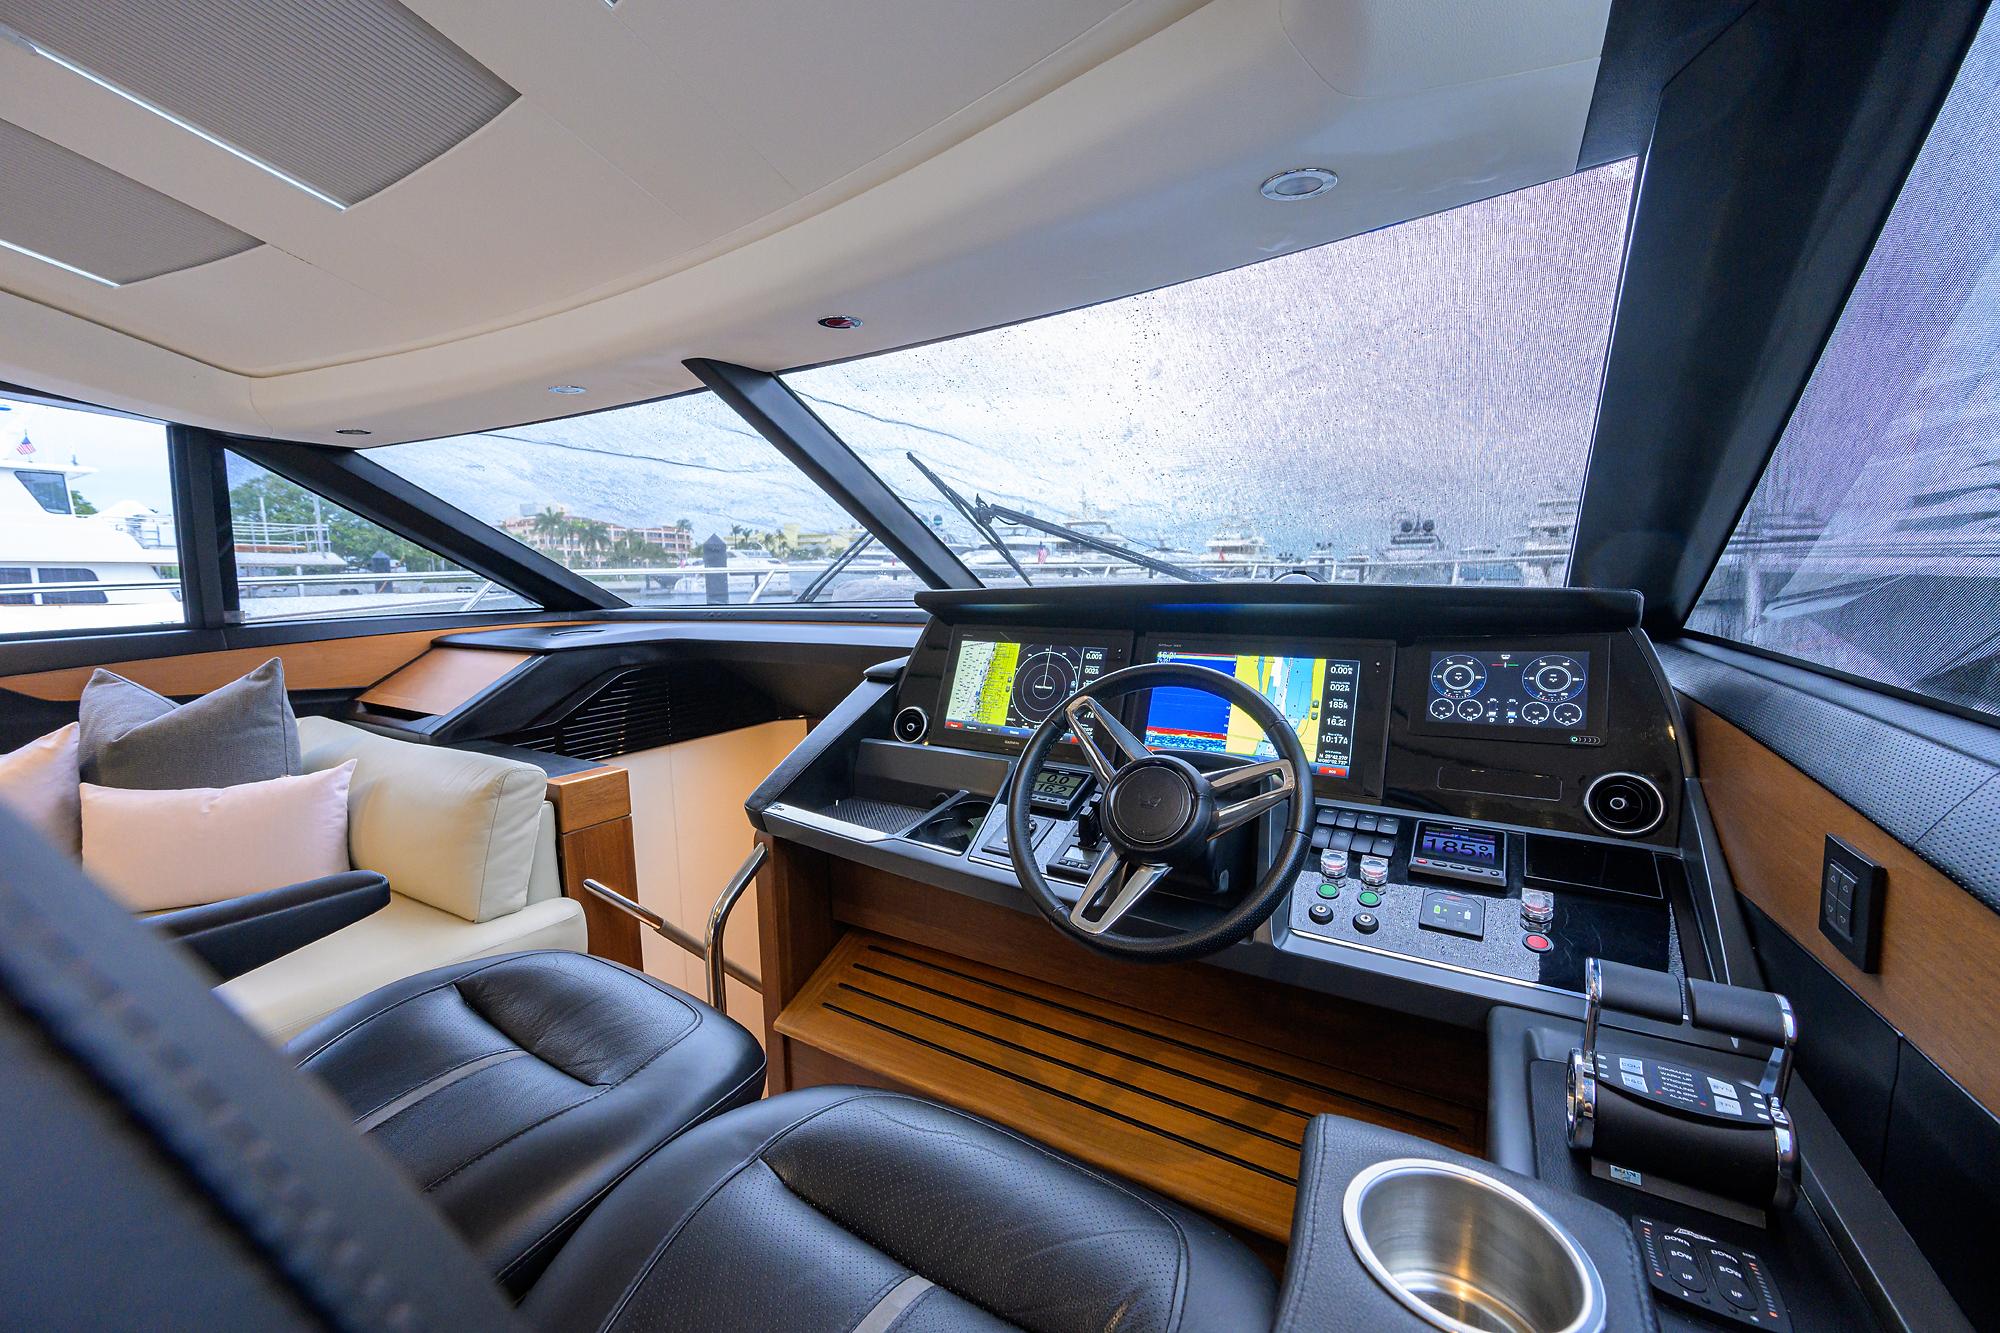 Princess S60 RockOn - Lower Helm, Seating and Electronics